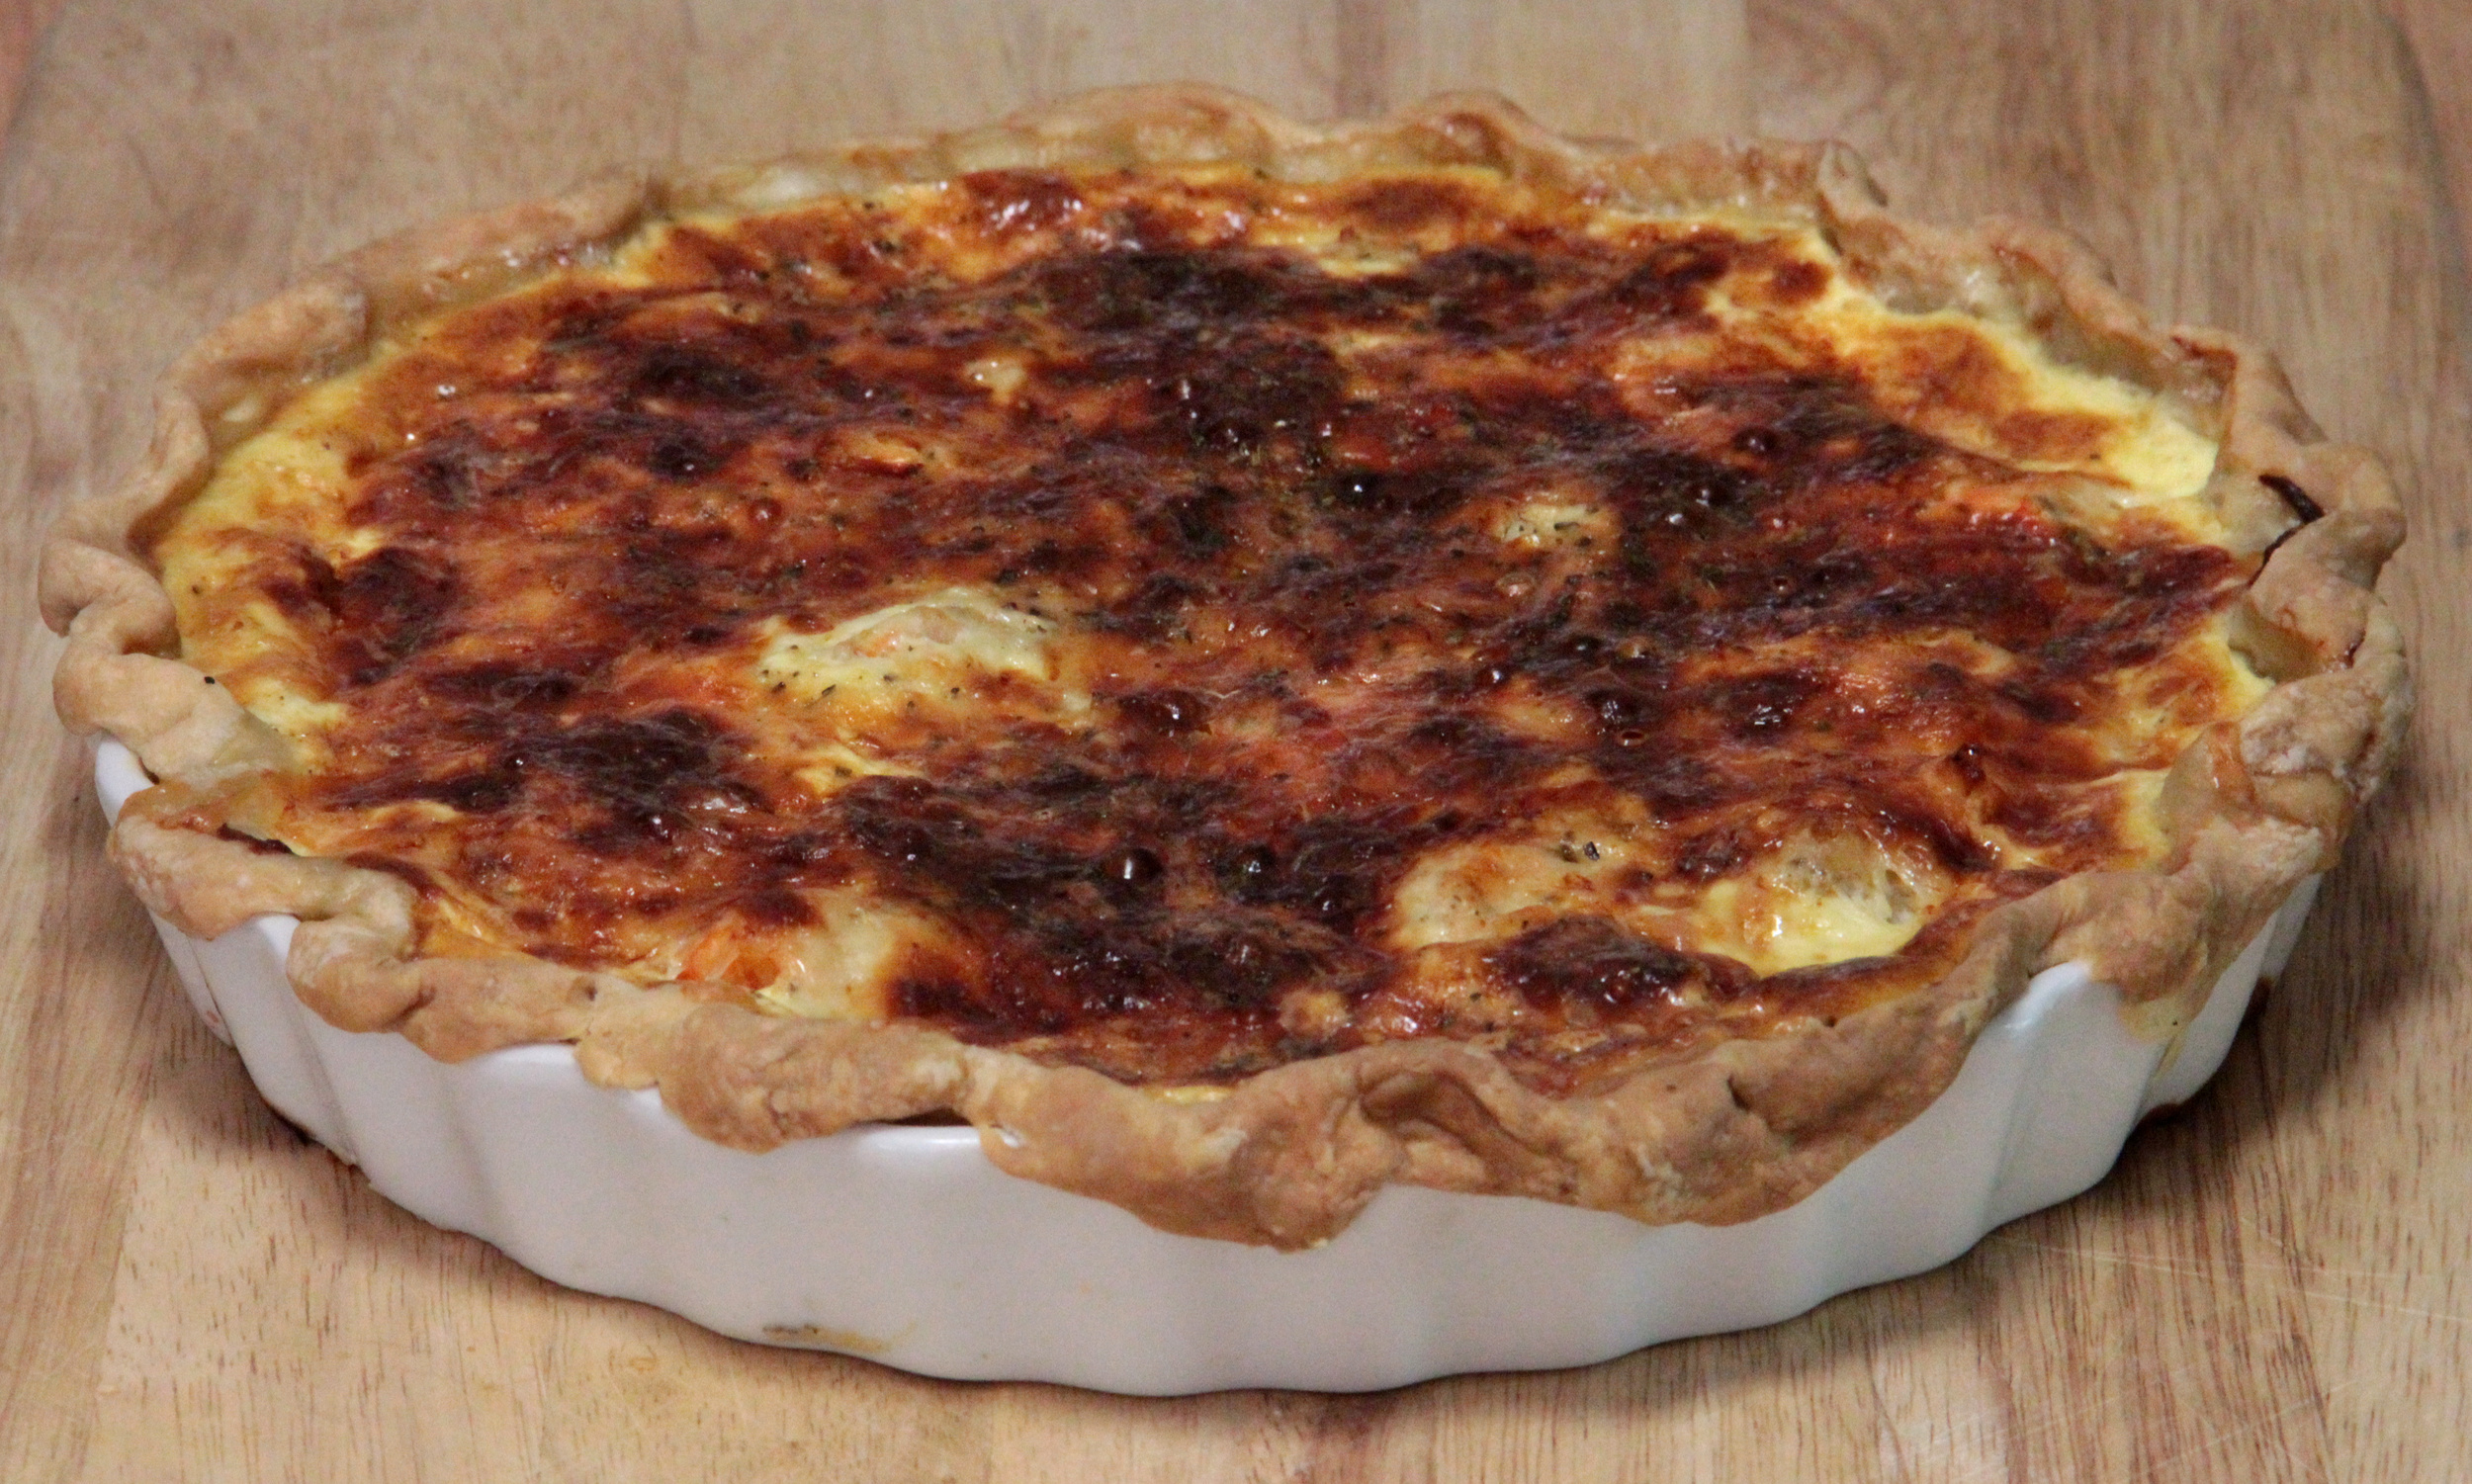 <p>For those of you who plan on being ultra-busy cooking other things for your Thanksgiving meal, don't fret. <a href="http://www.gourmandasia.com/recipe-by-product/fruits/sweet-apple-quiche-7359.html">This "sweet apple quiche" from gourmandasia.com</a> will be ready to go in under an hour.</p><p><a href='https://www.msn.com/en-us/community/channel/vid-cj9pqbr0vn9in2b6ddcd8sfgpfq6x6utp44fssrv6mc2gtybw0us'>Follow us on MSN to see more of our exclusive lifestyle content.</a></p>